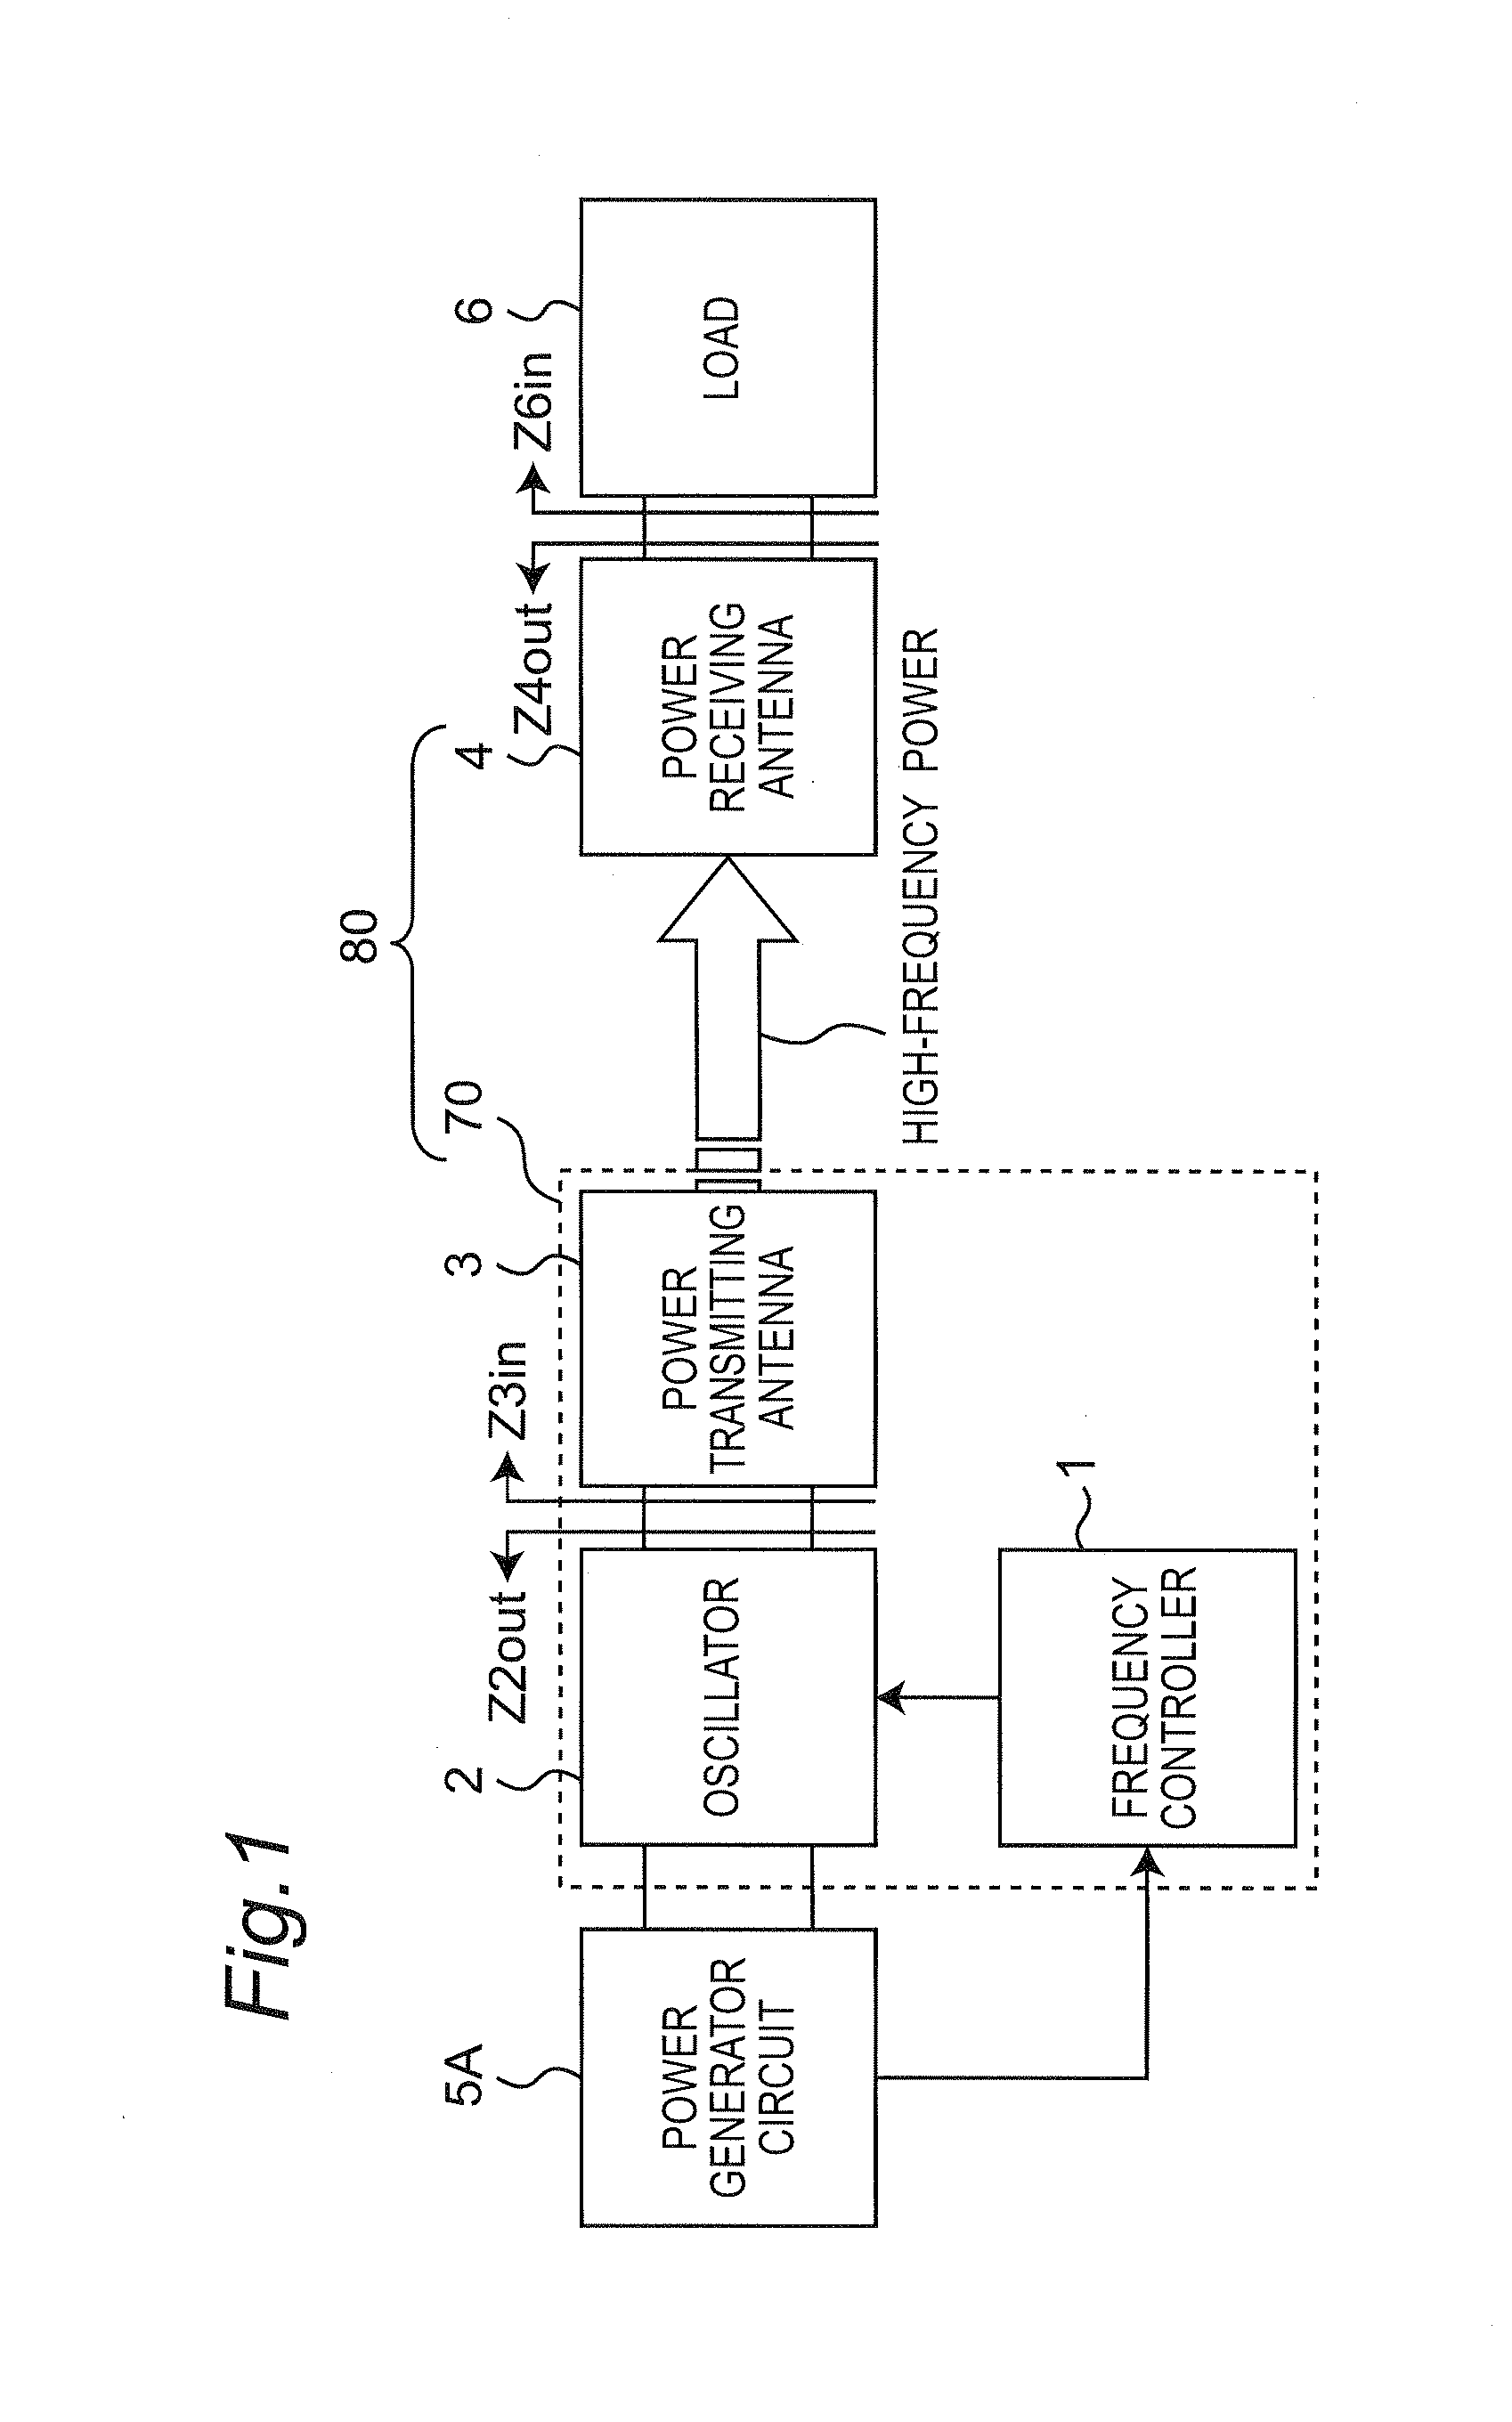 Wireless power transfer system for wirelessly transferring electric power in noncontact manner by utilizing resonant magnetic field coupling